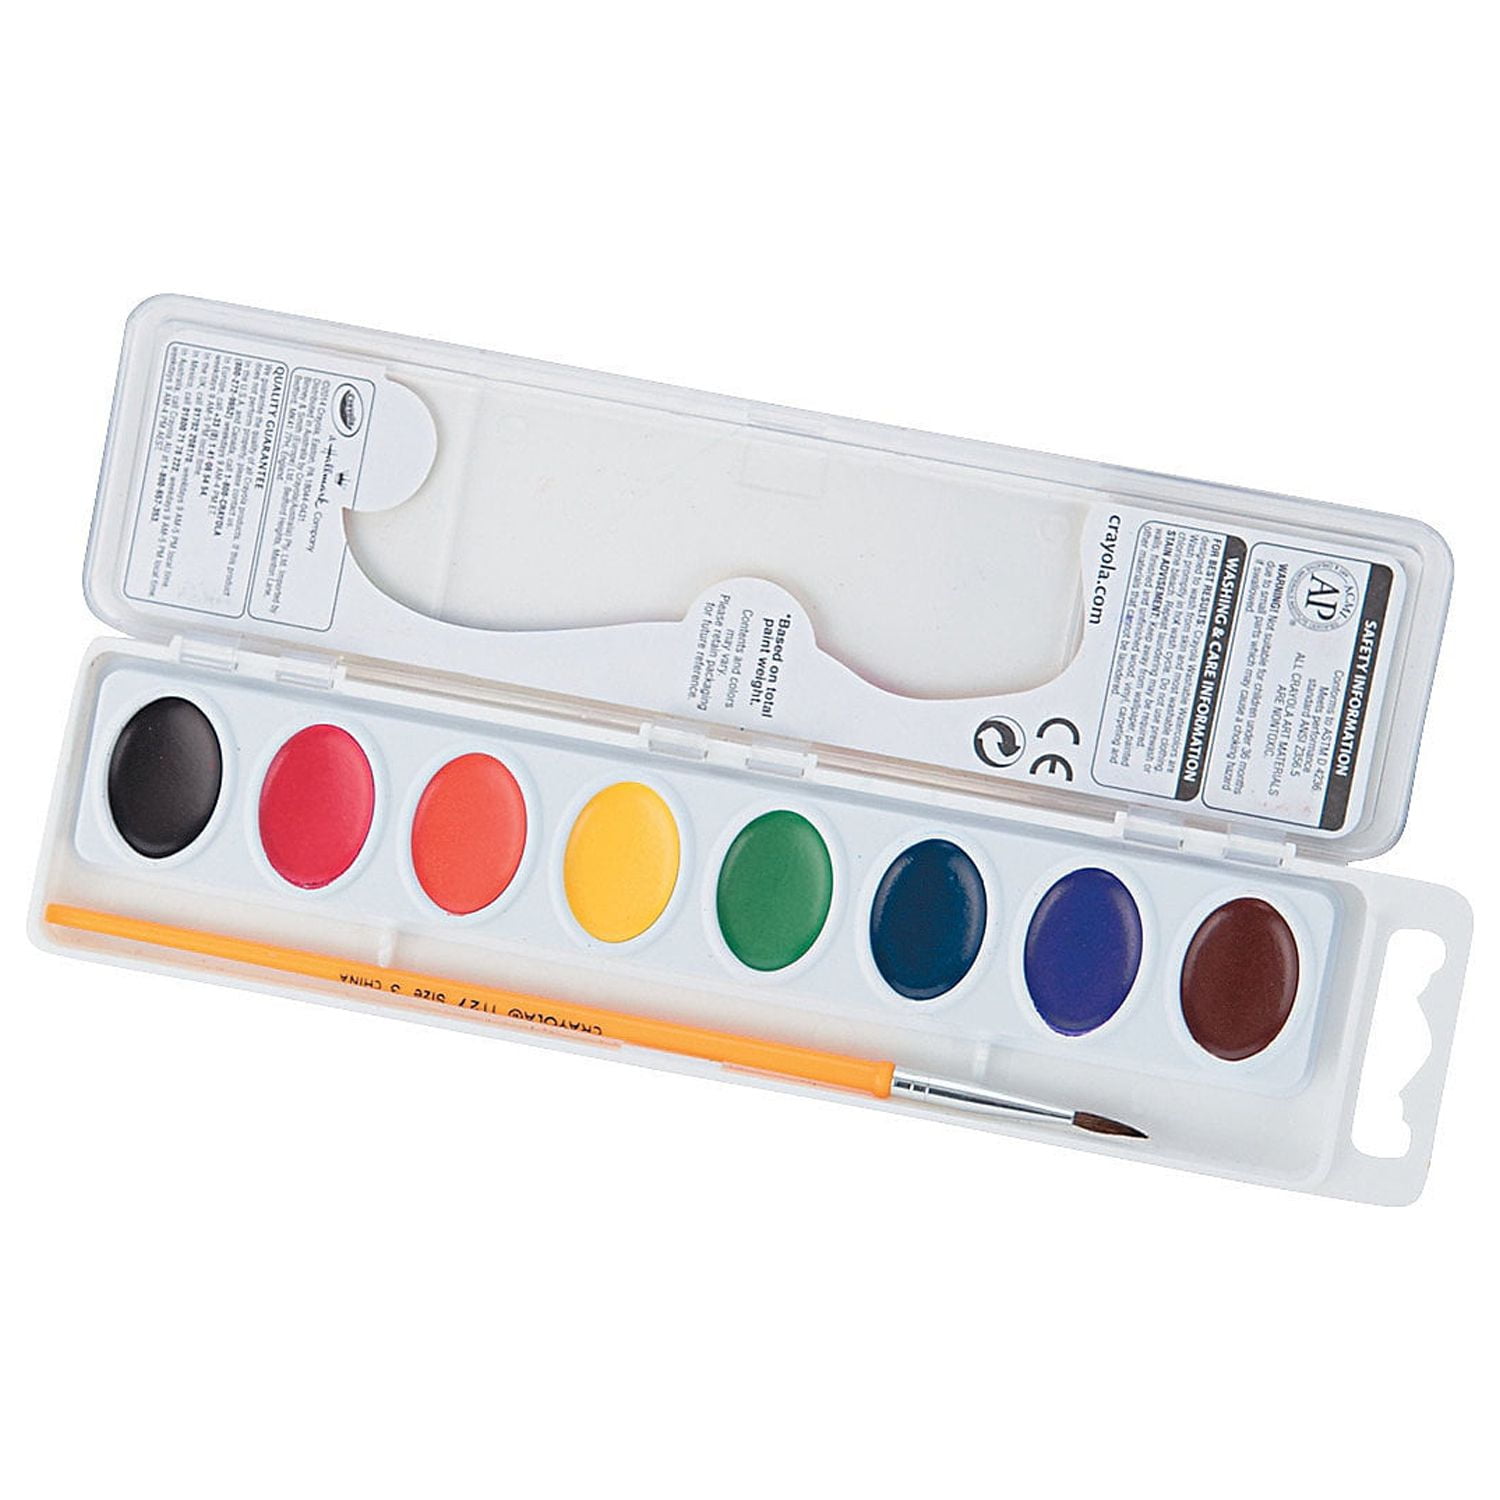 Crayola Watercolor Paint Trays - 8 Color - Basic Supplies - 1 Piece